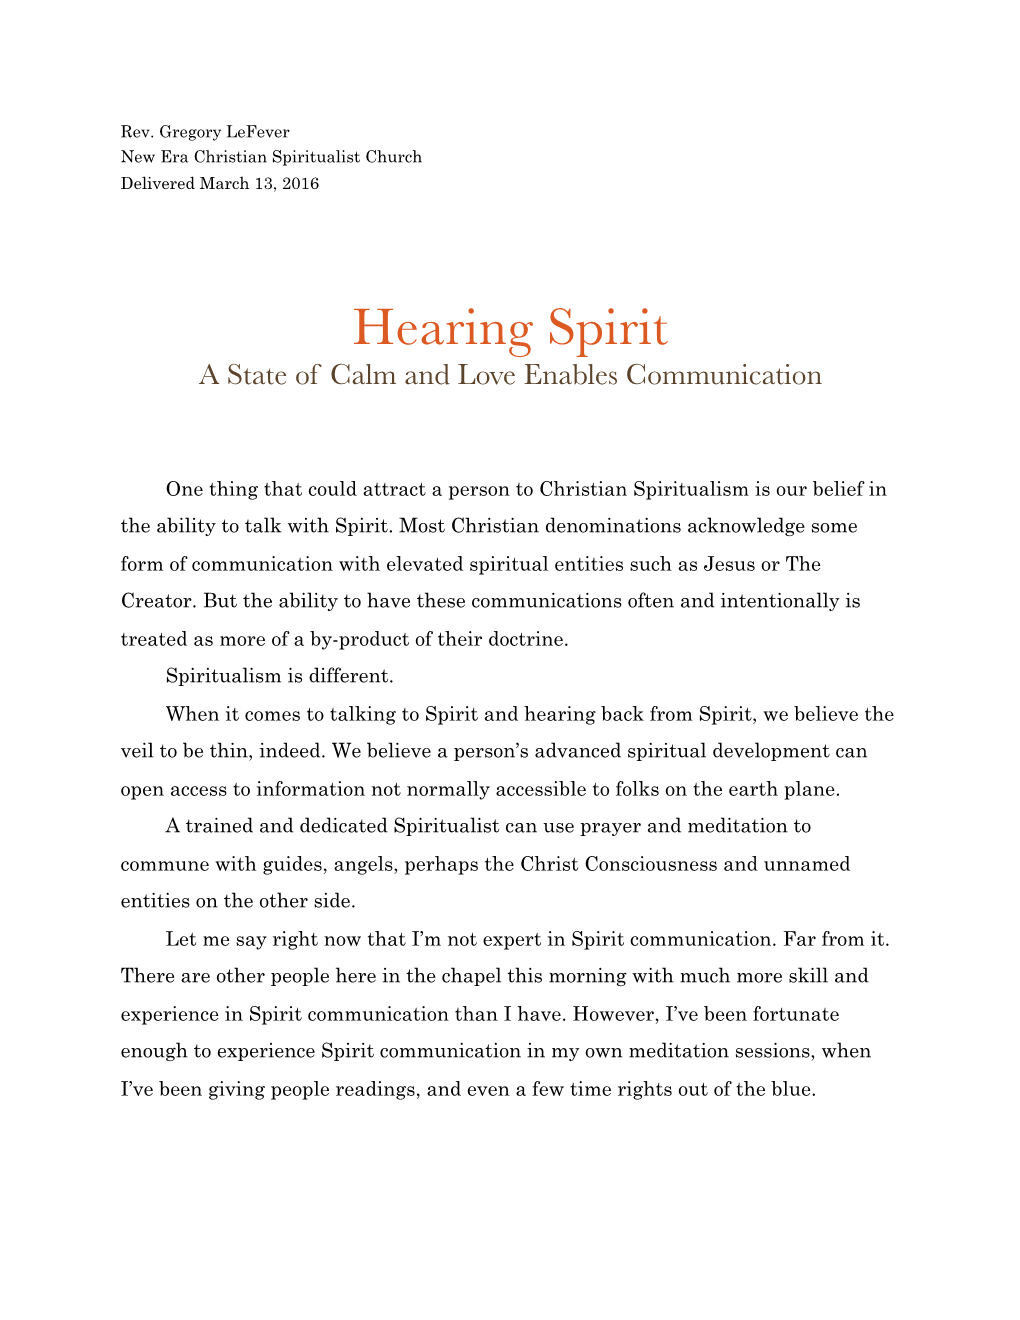 Hearing Spirit a State of Calm and Love Enables Communication